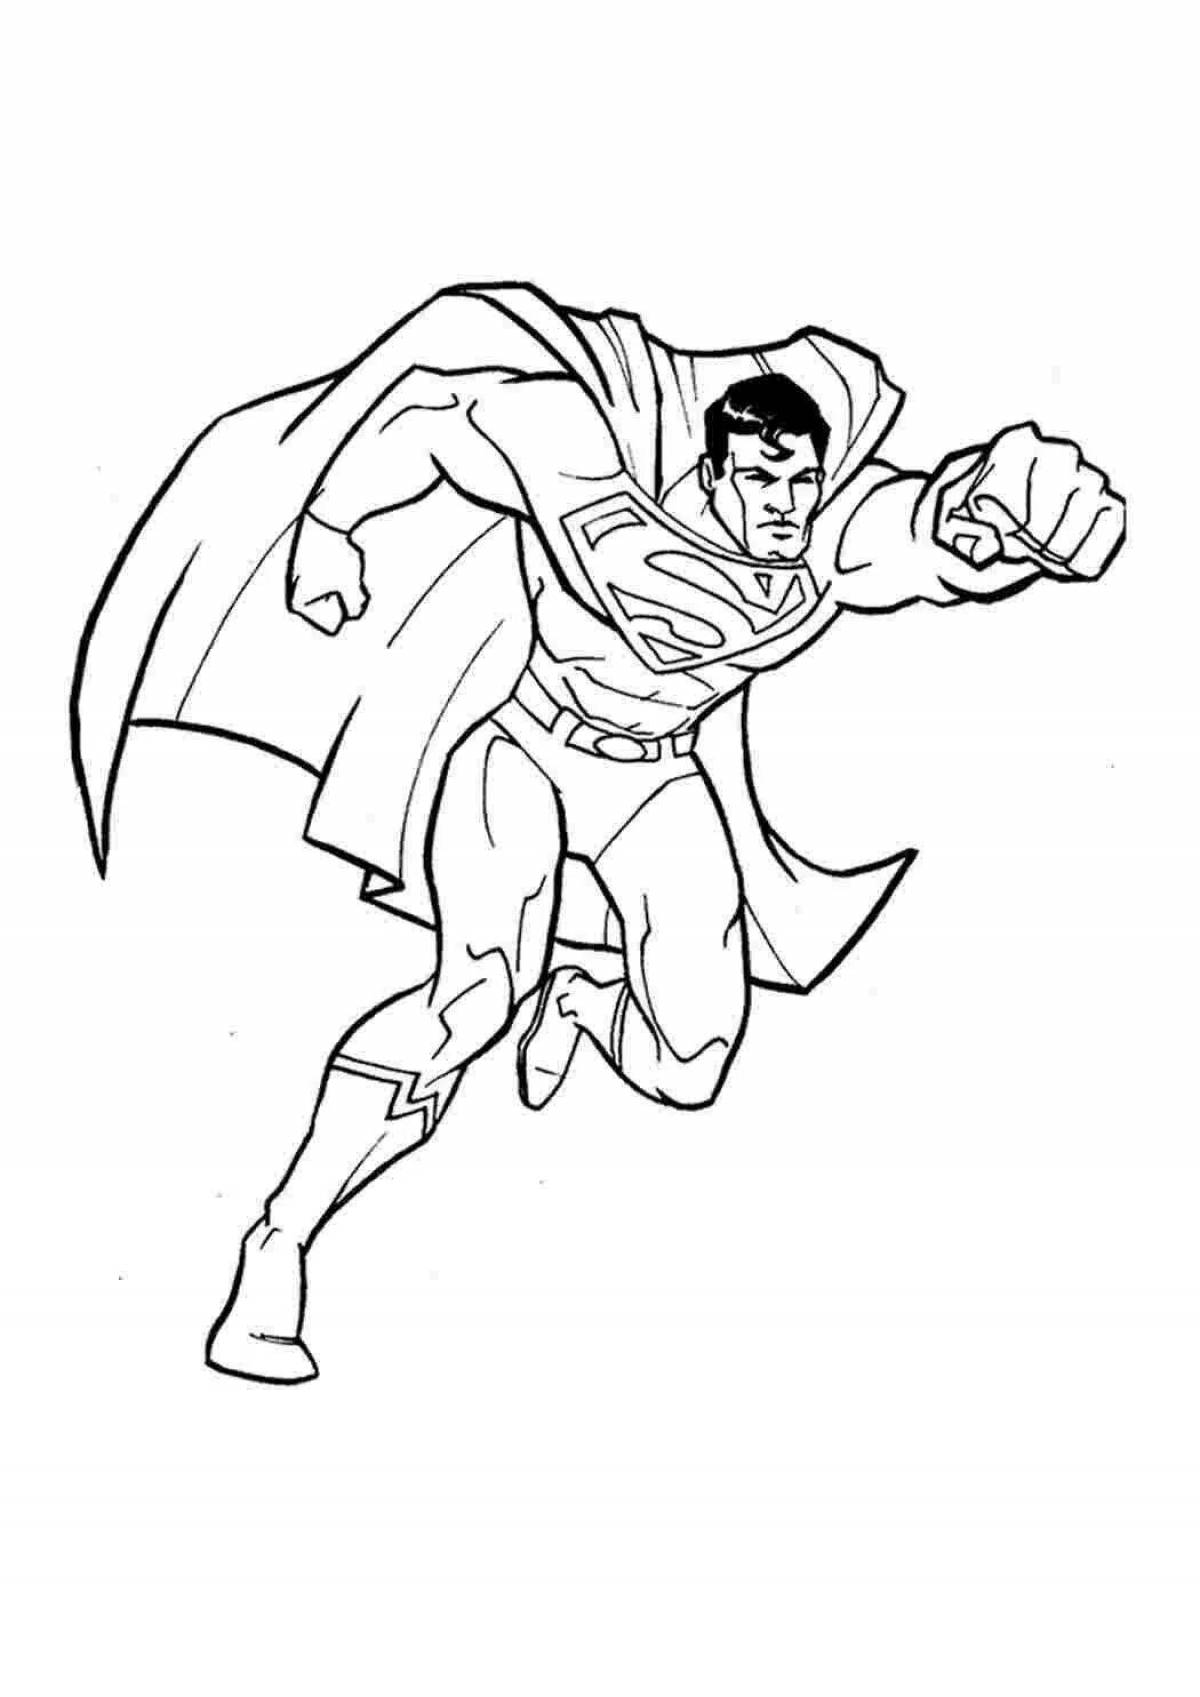 Fancy superman coloring book for kids 3-4 years old